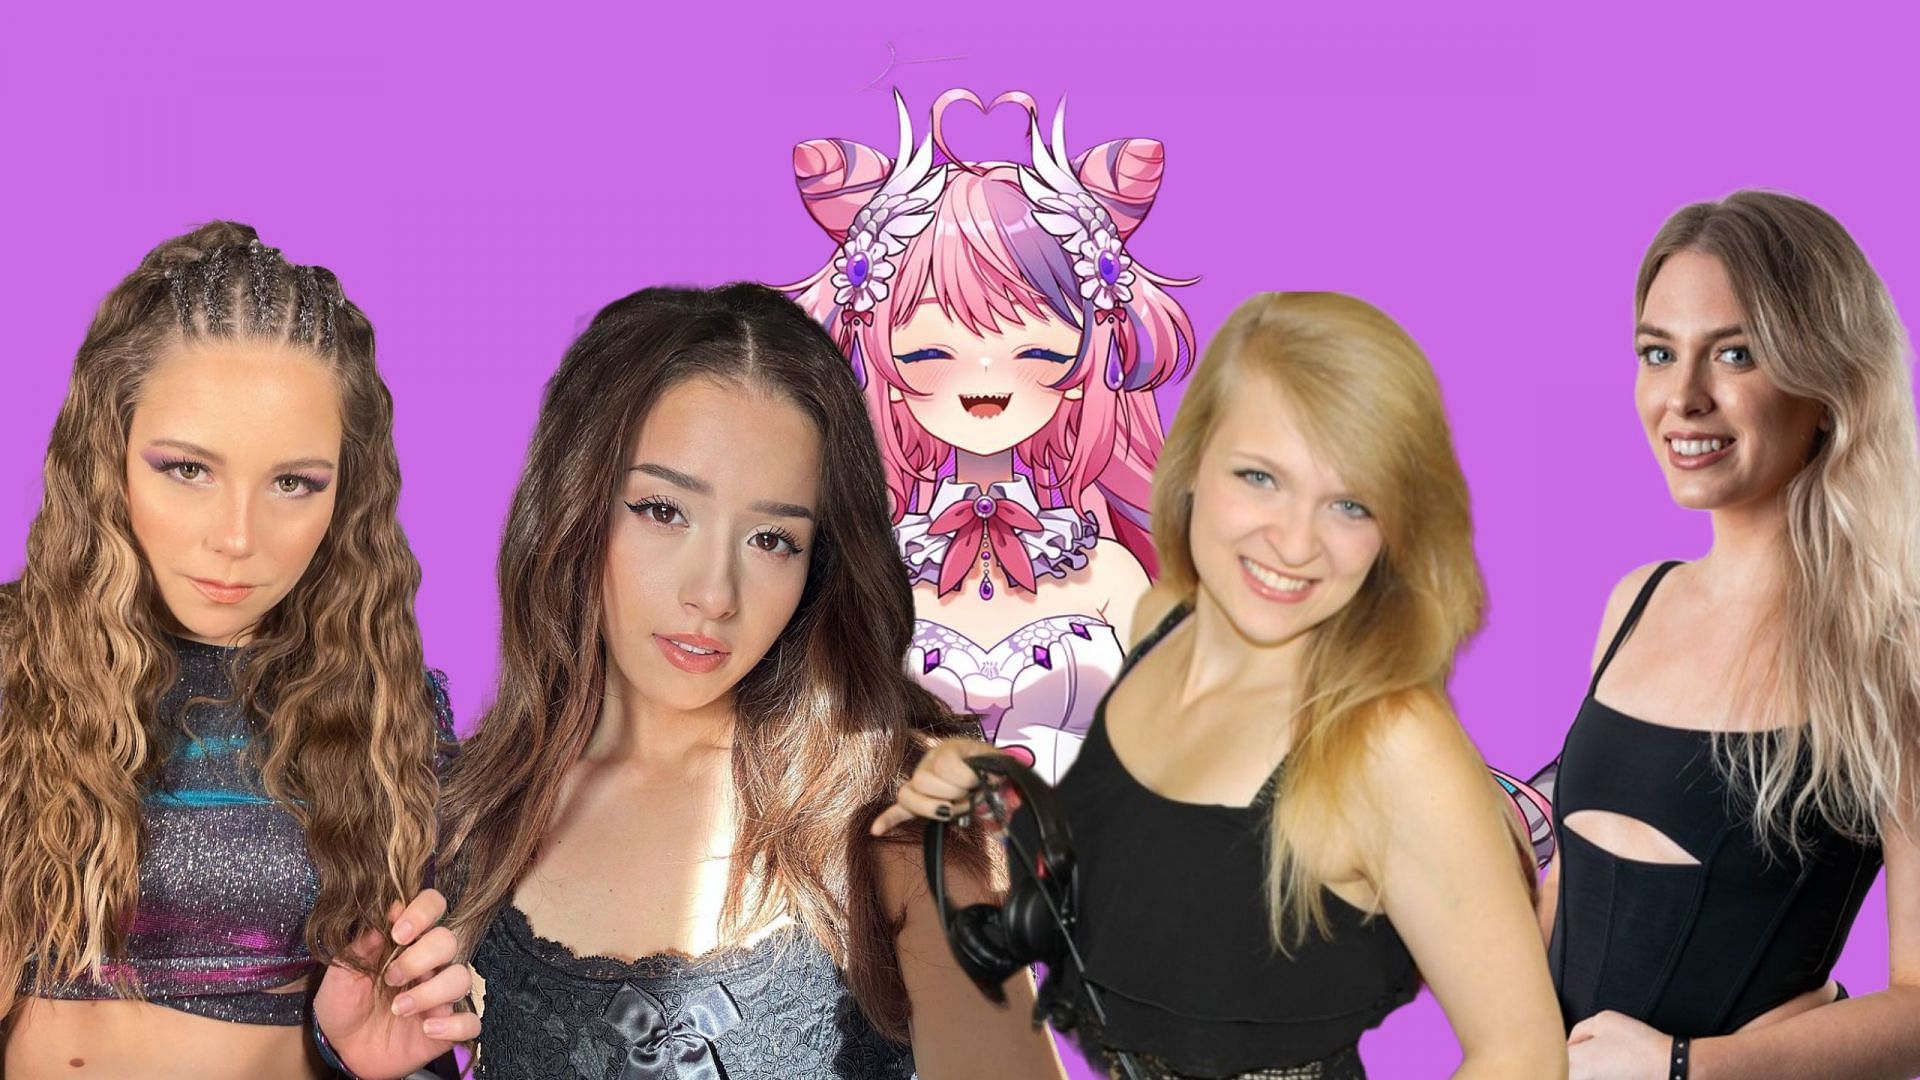 Top 5 biggest Twitch streamers in 2023